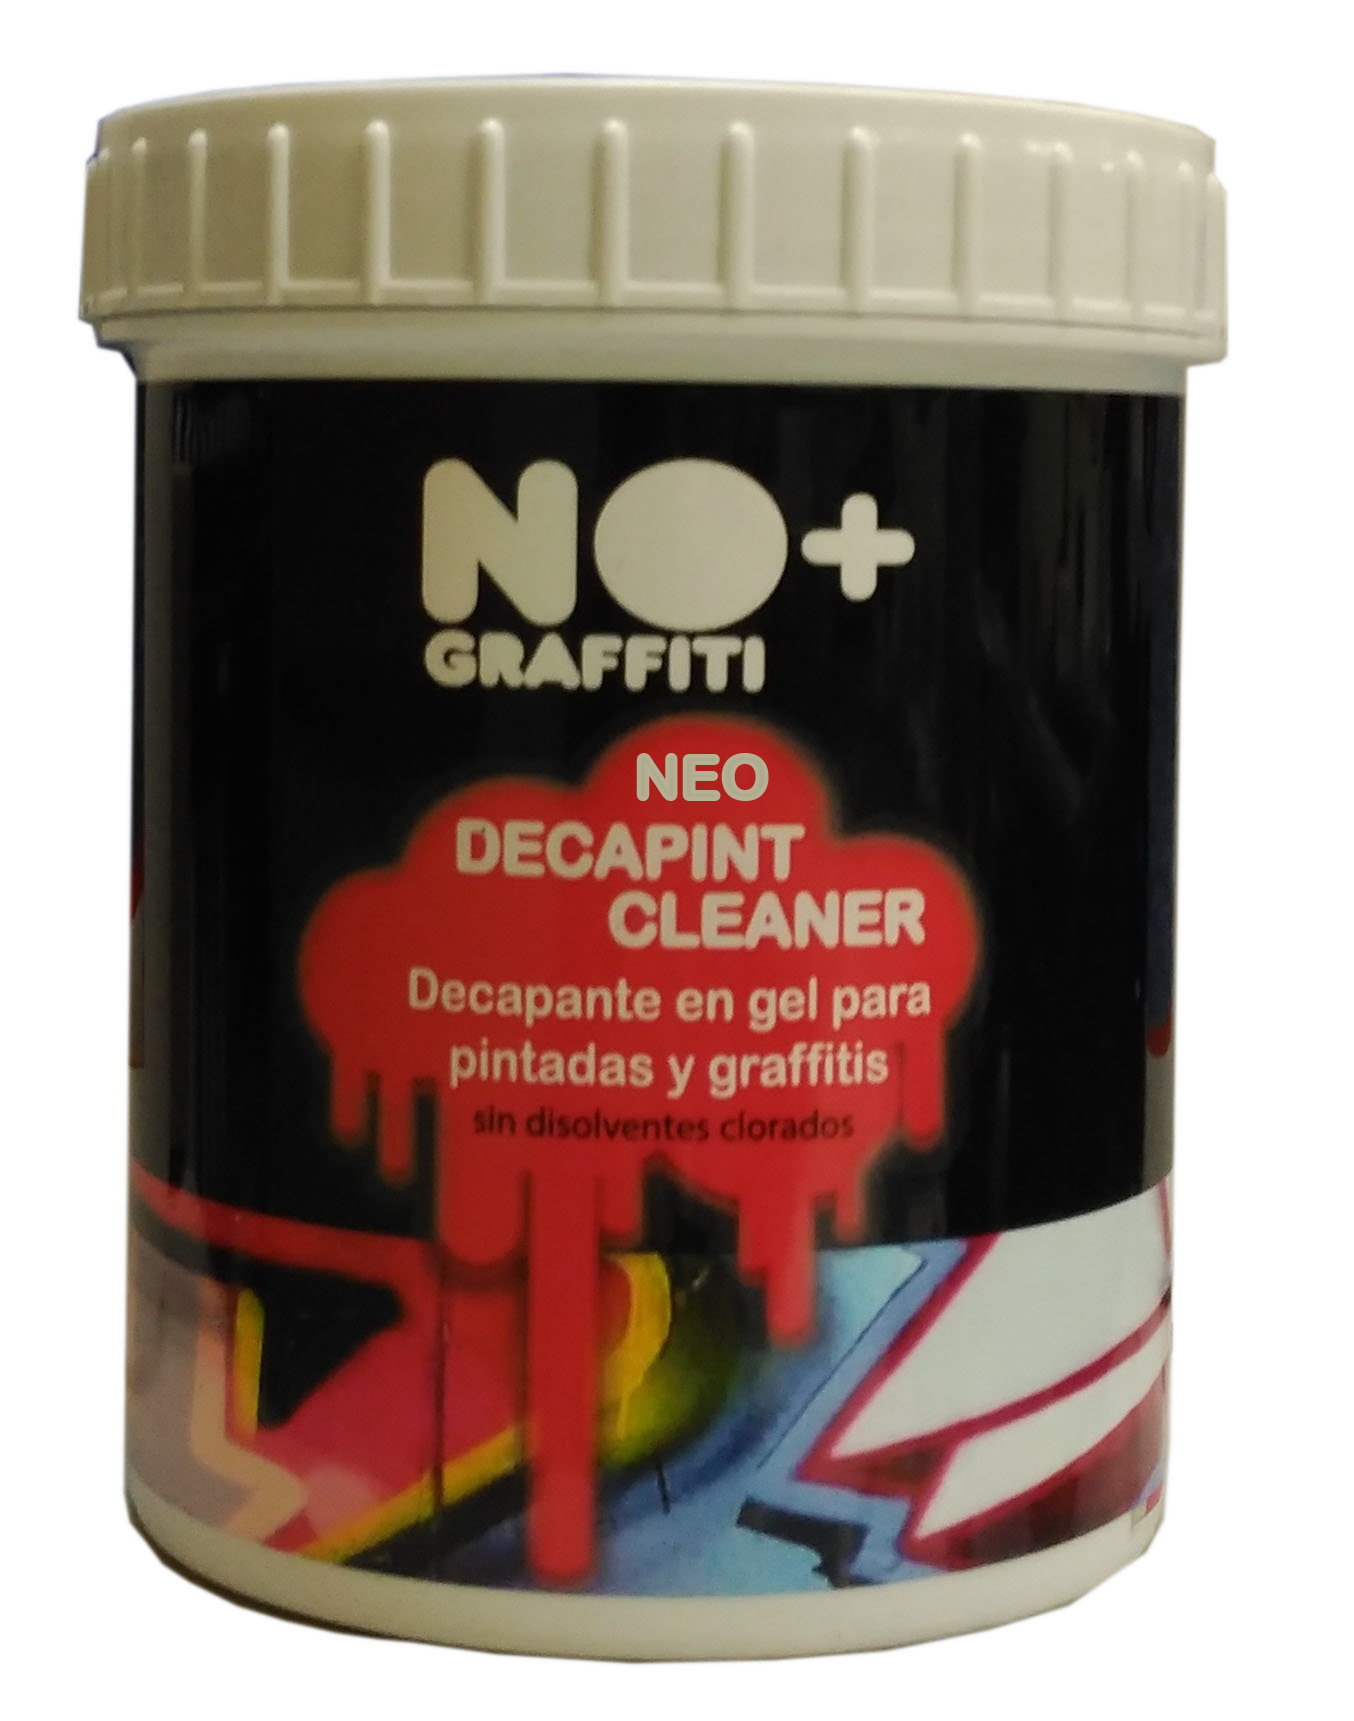 NEOdecapint cleaner  - Quitar pintadas: consíguelo con Neodecapint Cleaner